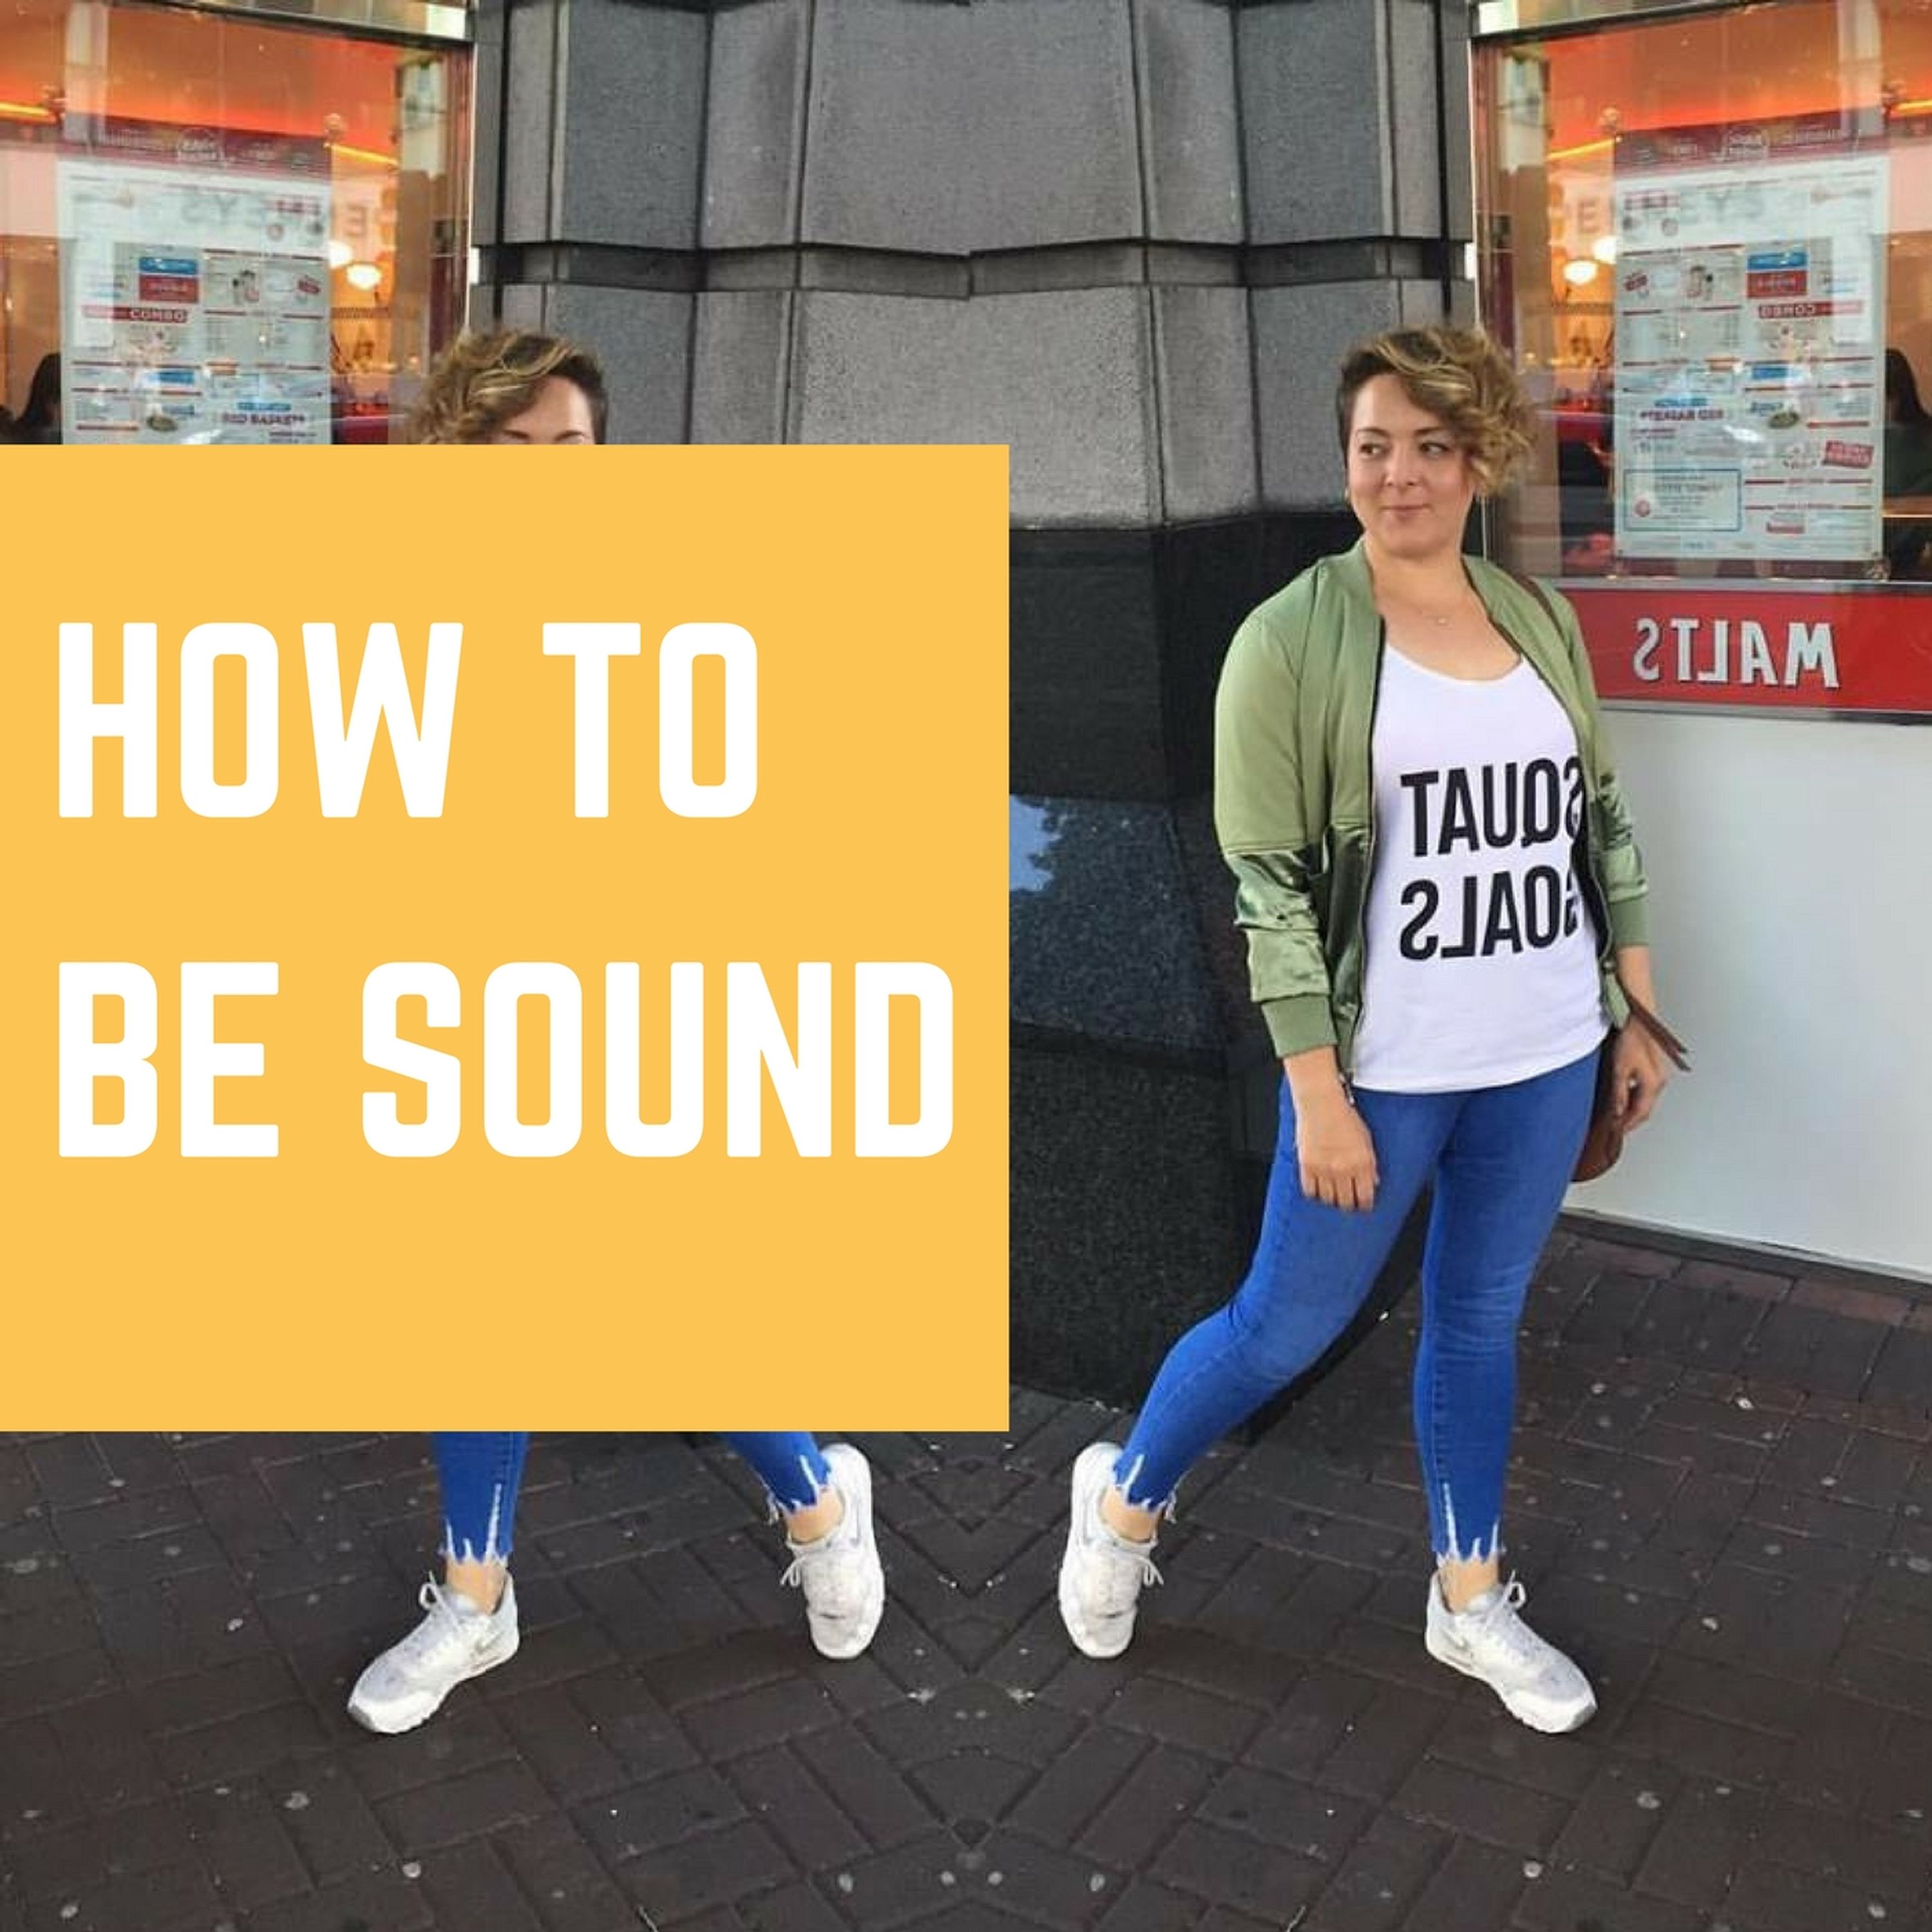 Holly Shortall on How to be sound